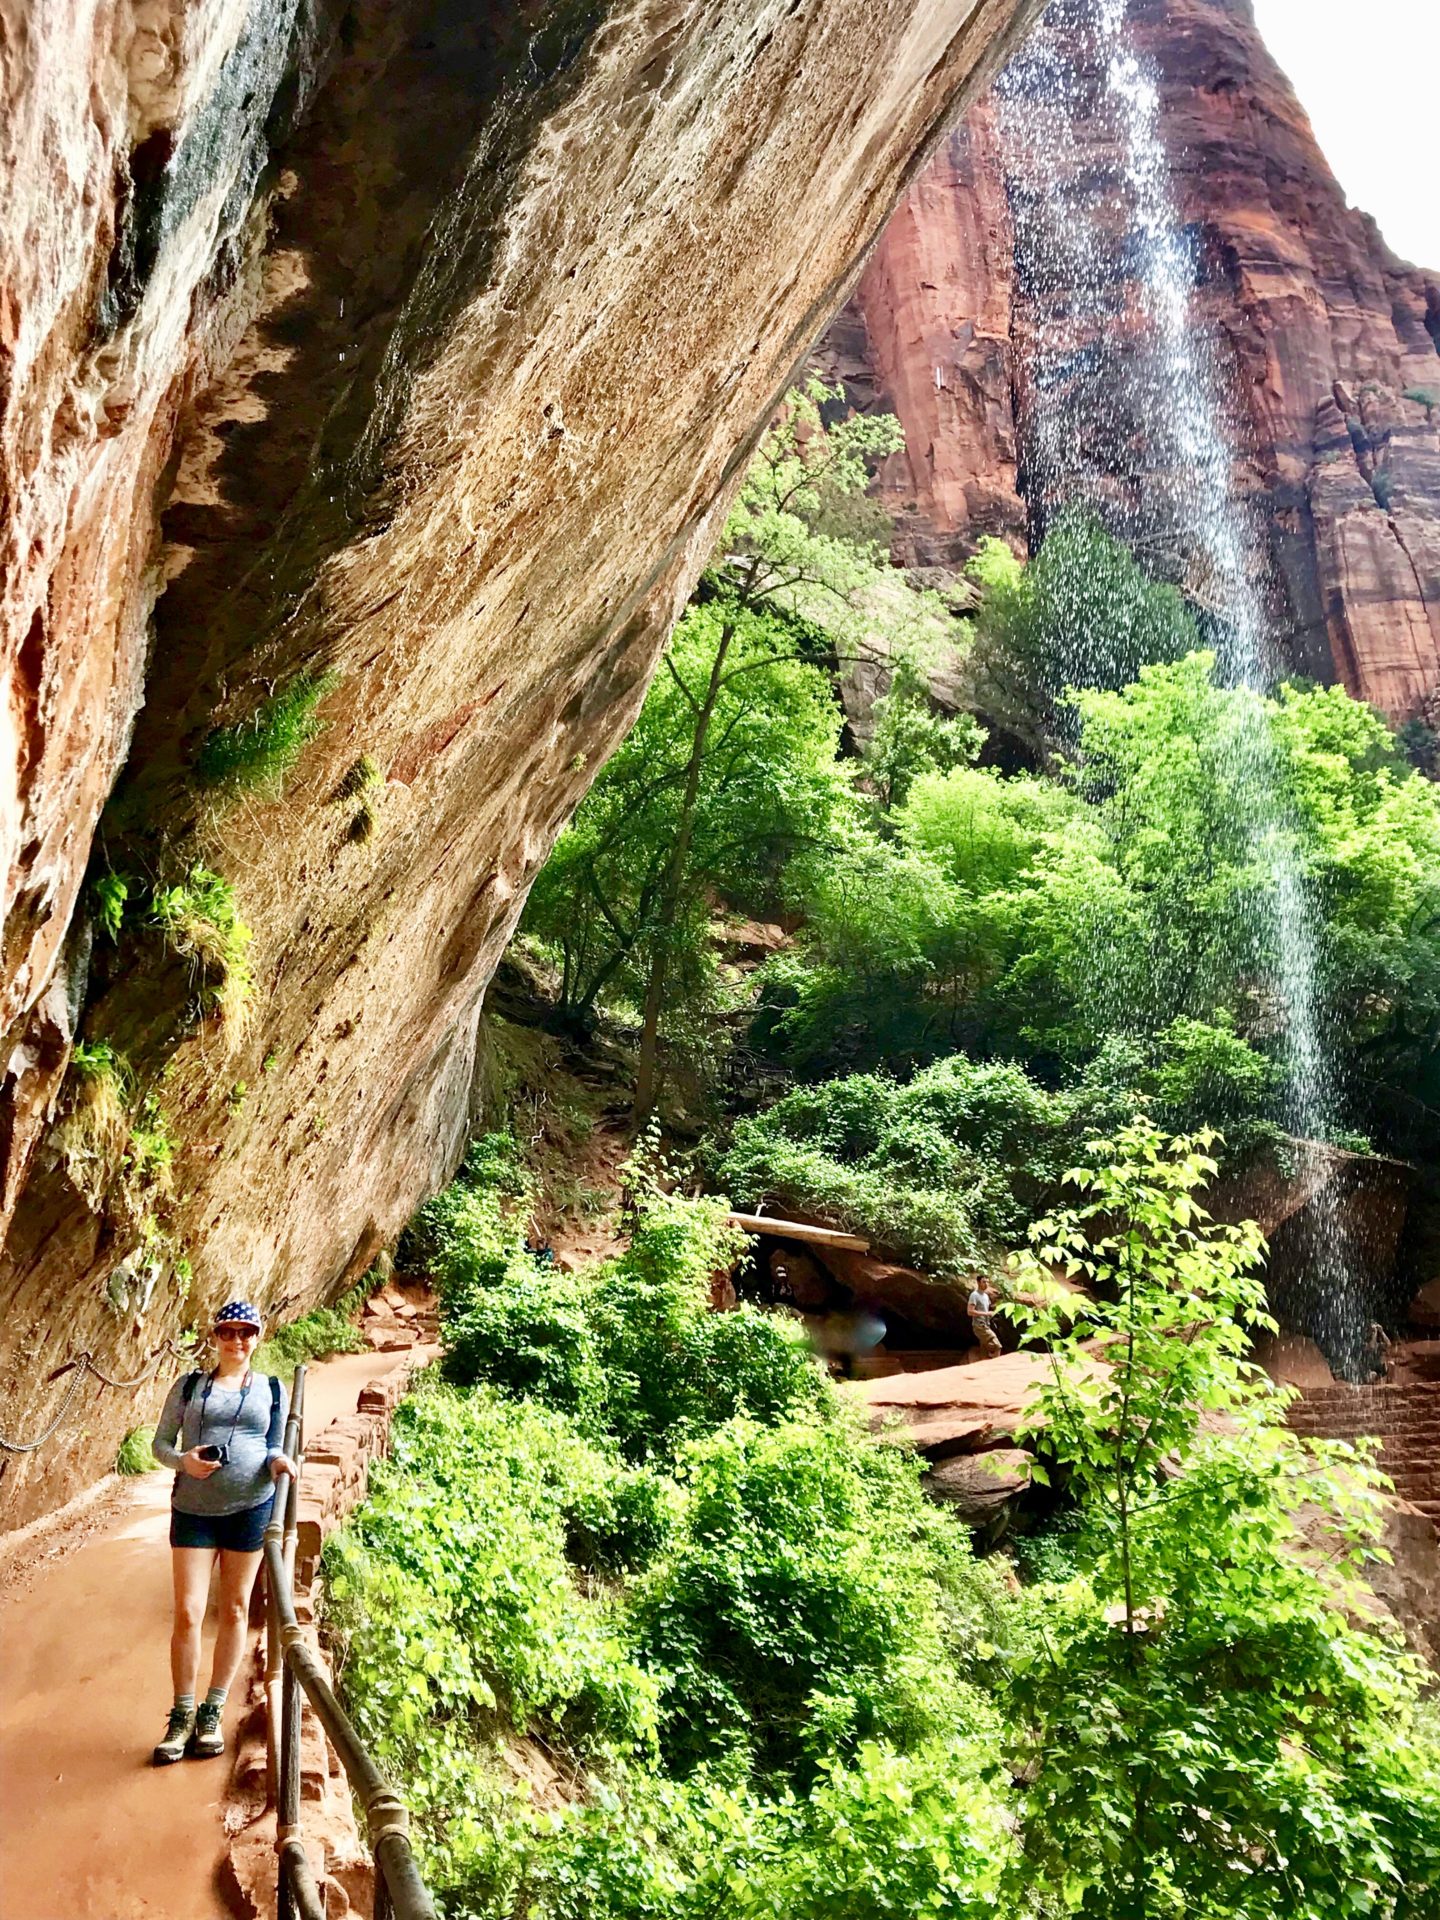 Lower Emerald Pool Trail, Zion National Park